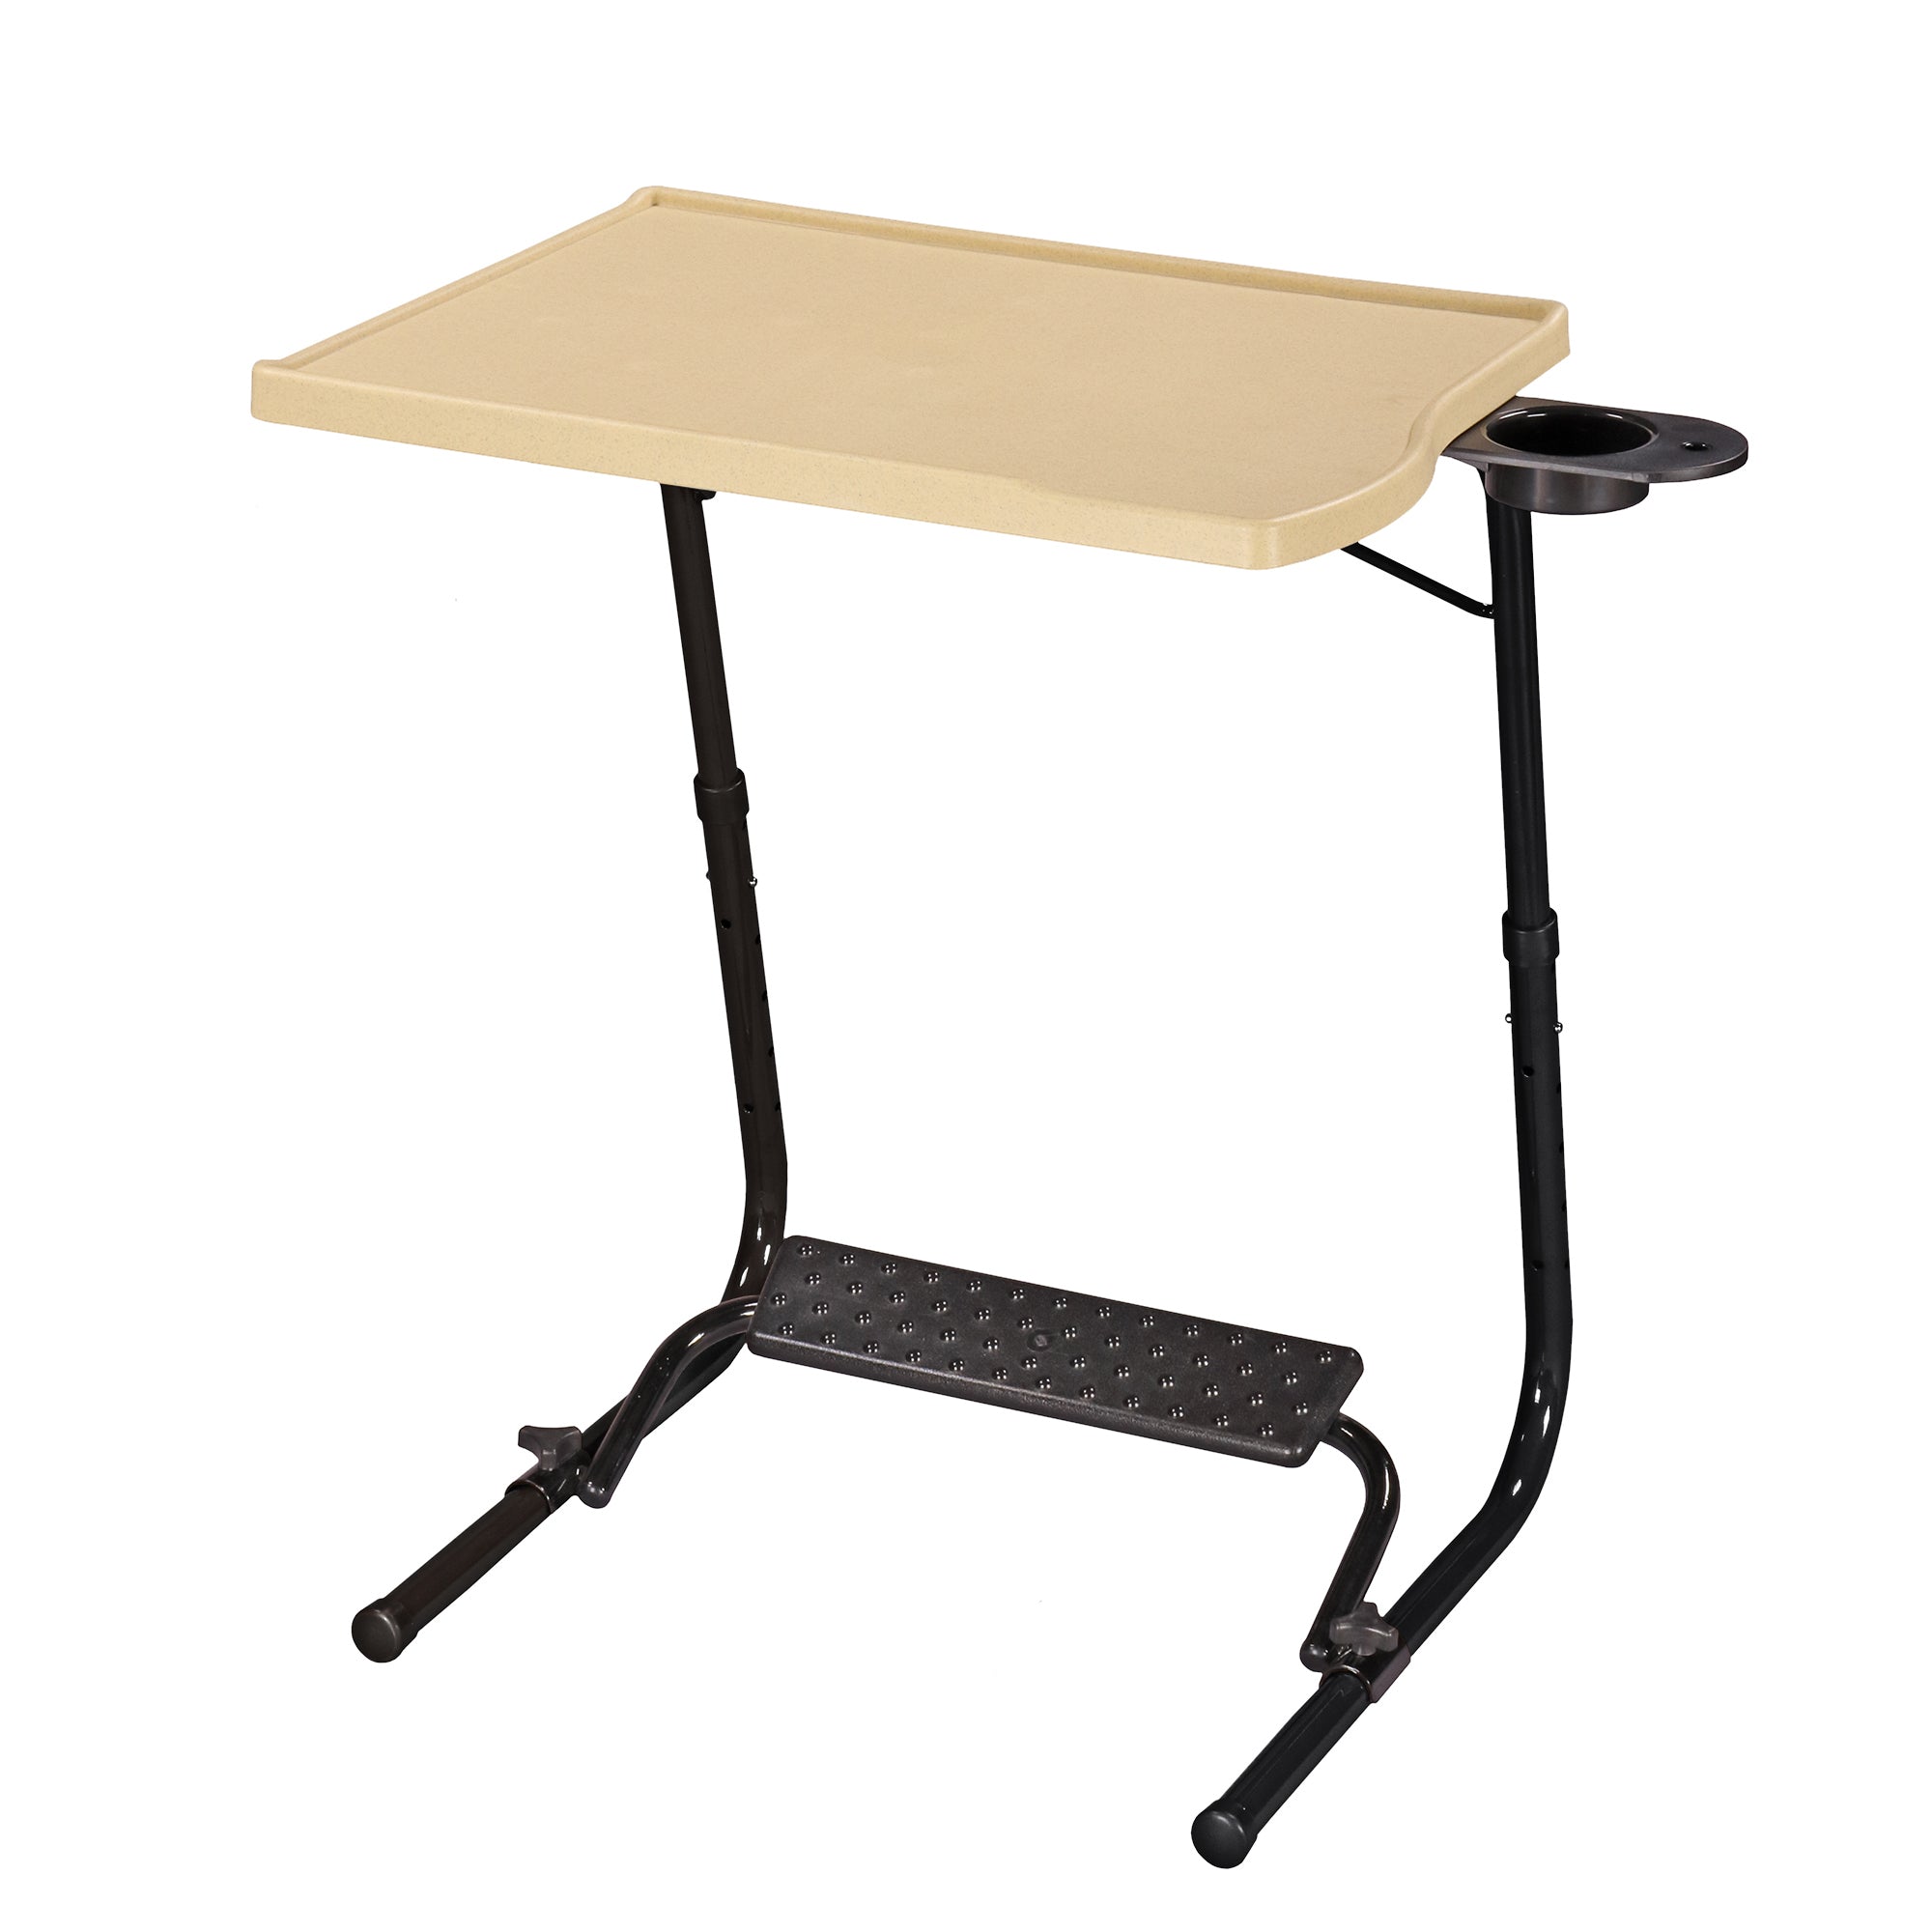 TABLE BUDDY executive ® | Folding Table With Cup Holder & Detachable Foot Rest | Marble